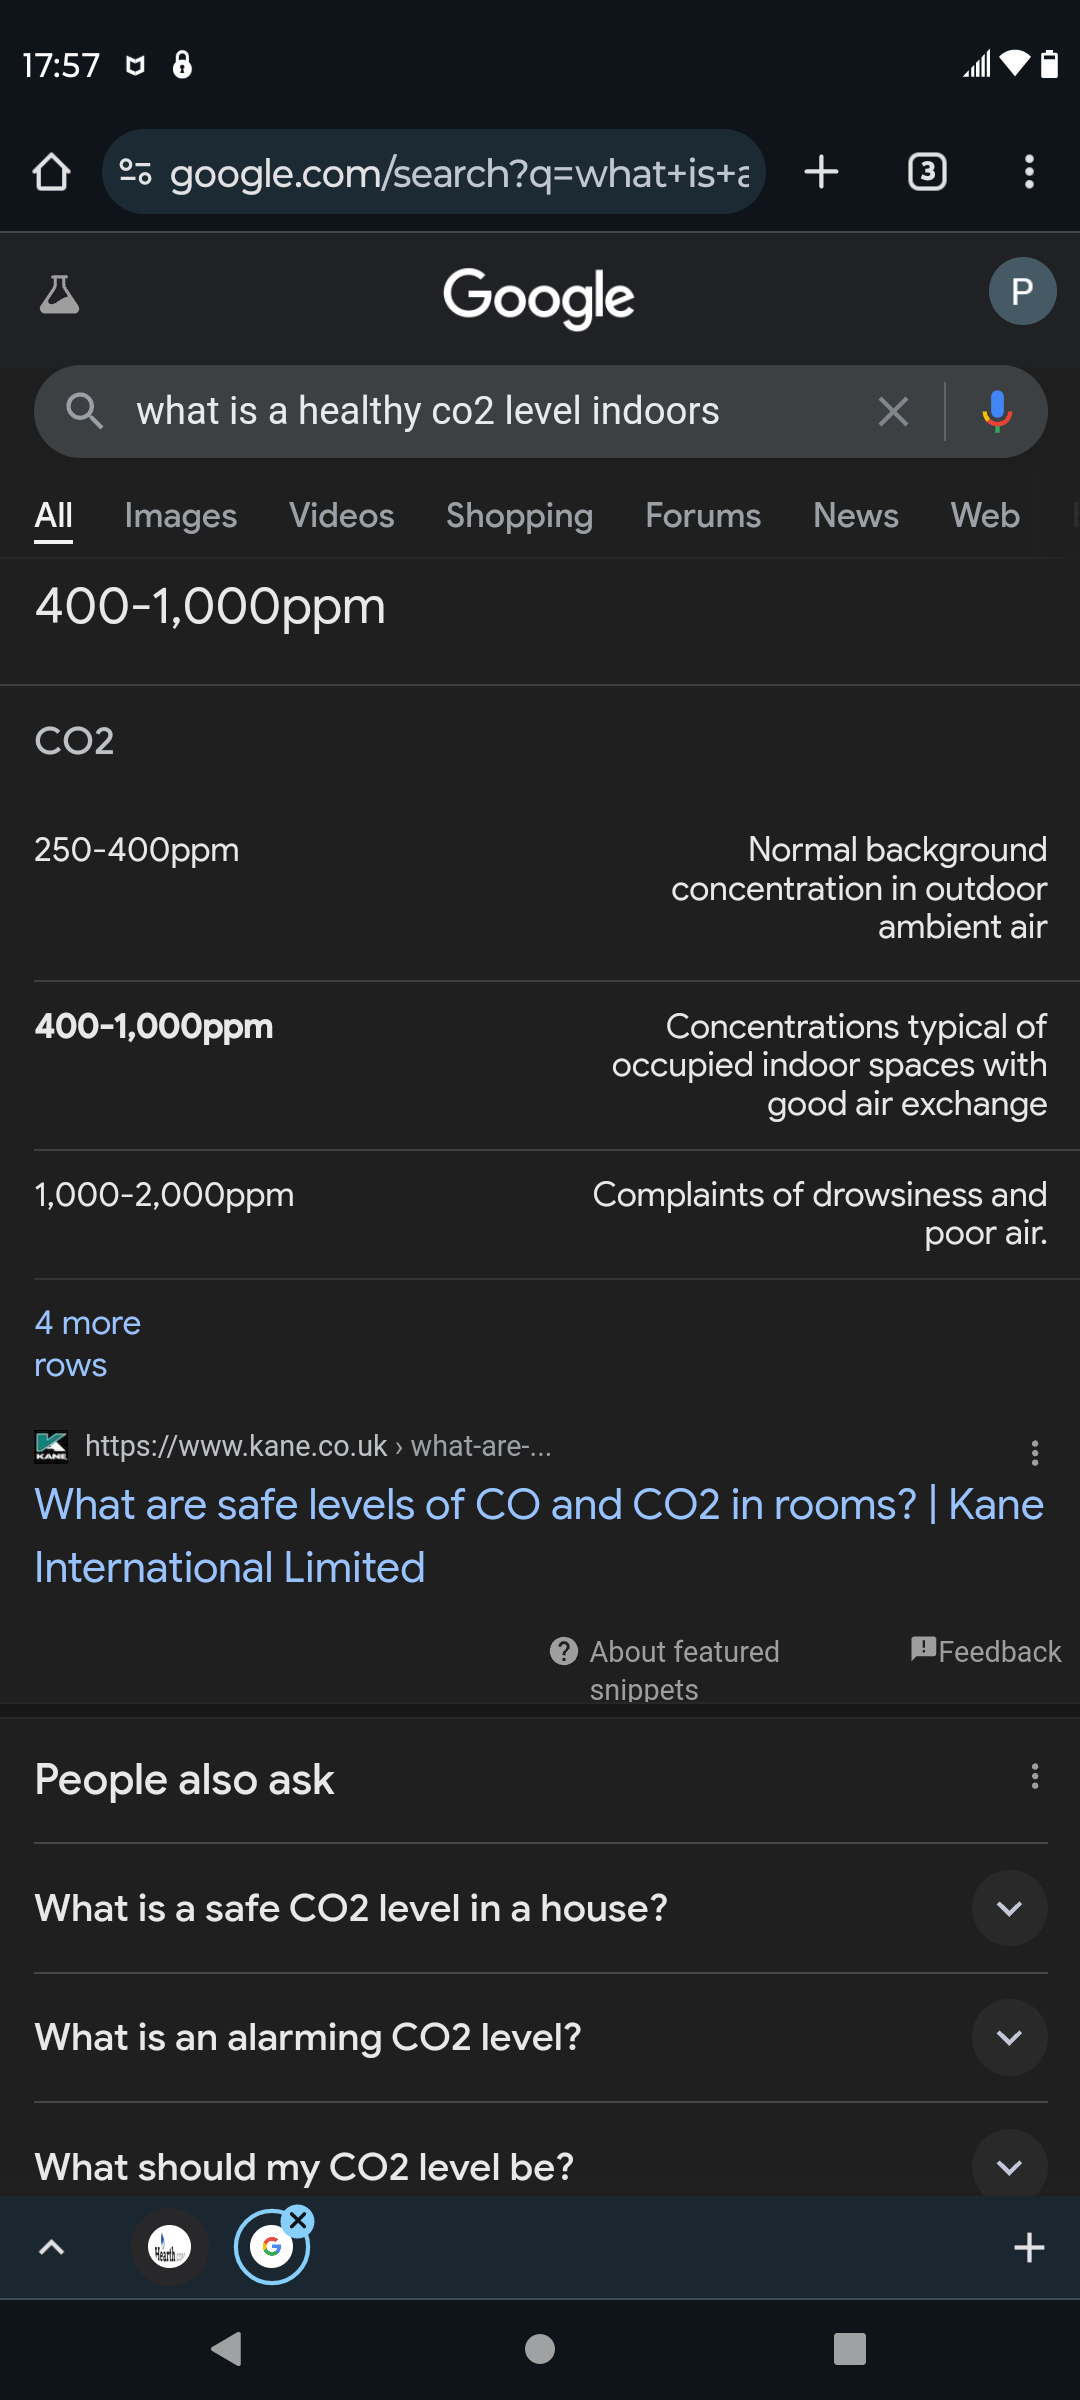 CO2 and Indoor Air Quality, school me please